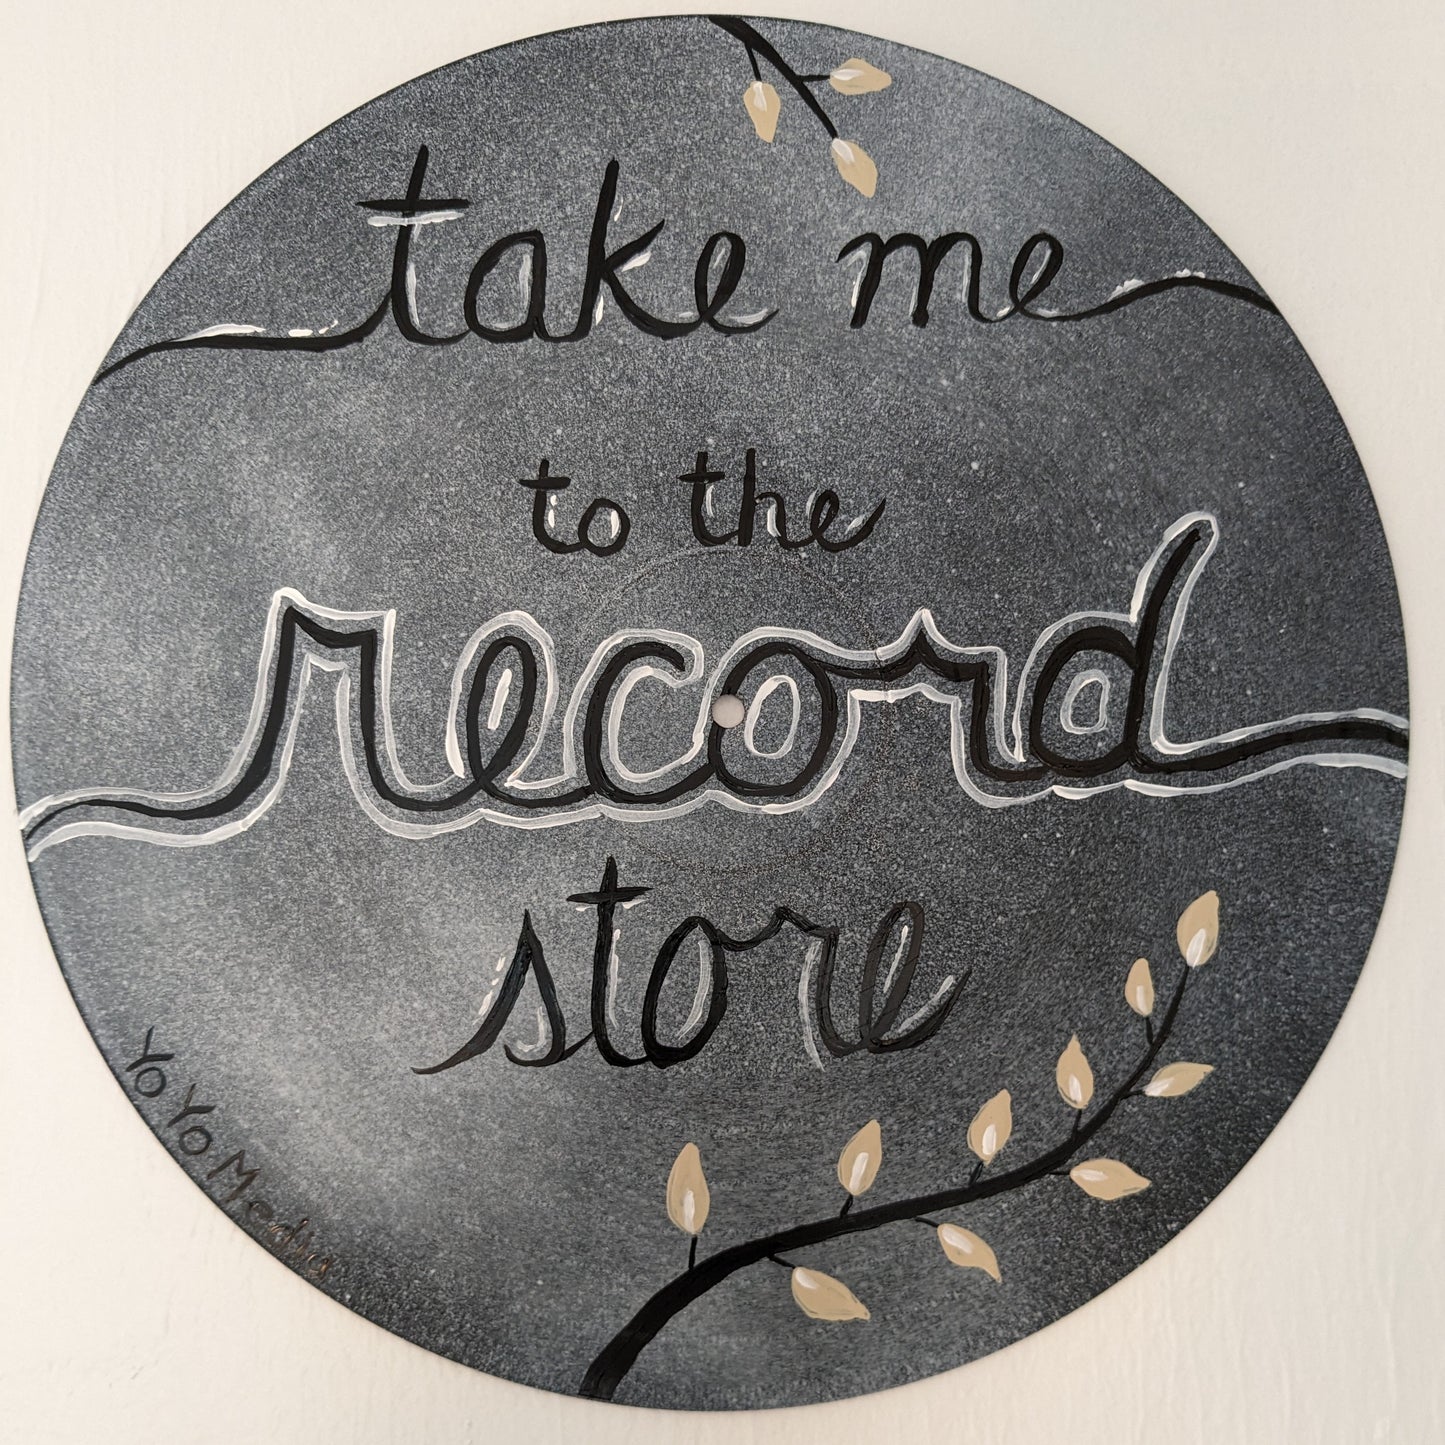 'Take Me To The Record Store' Record Art